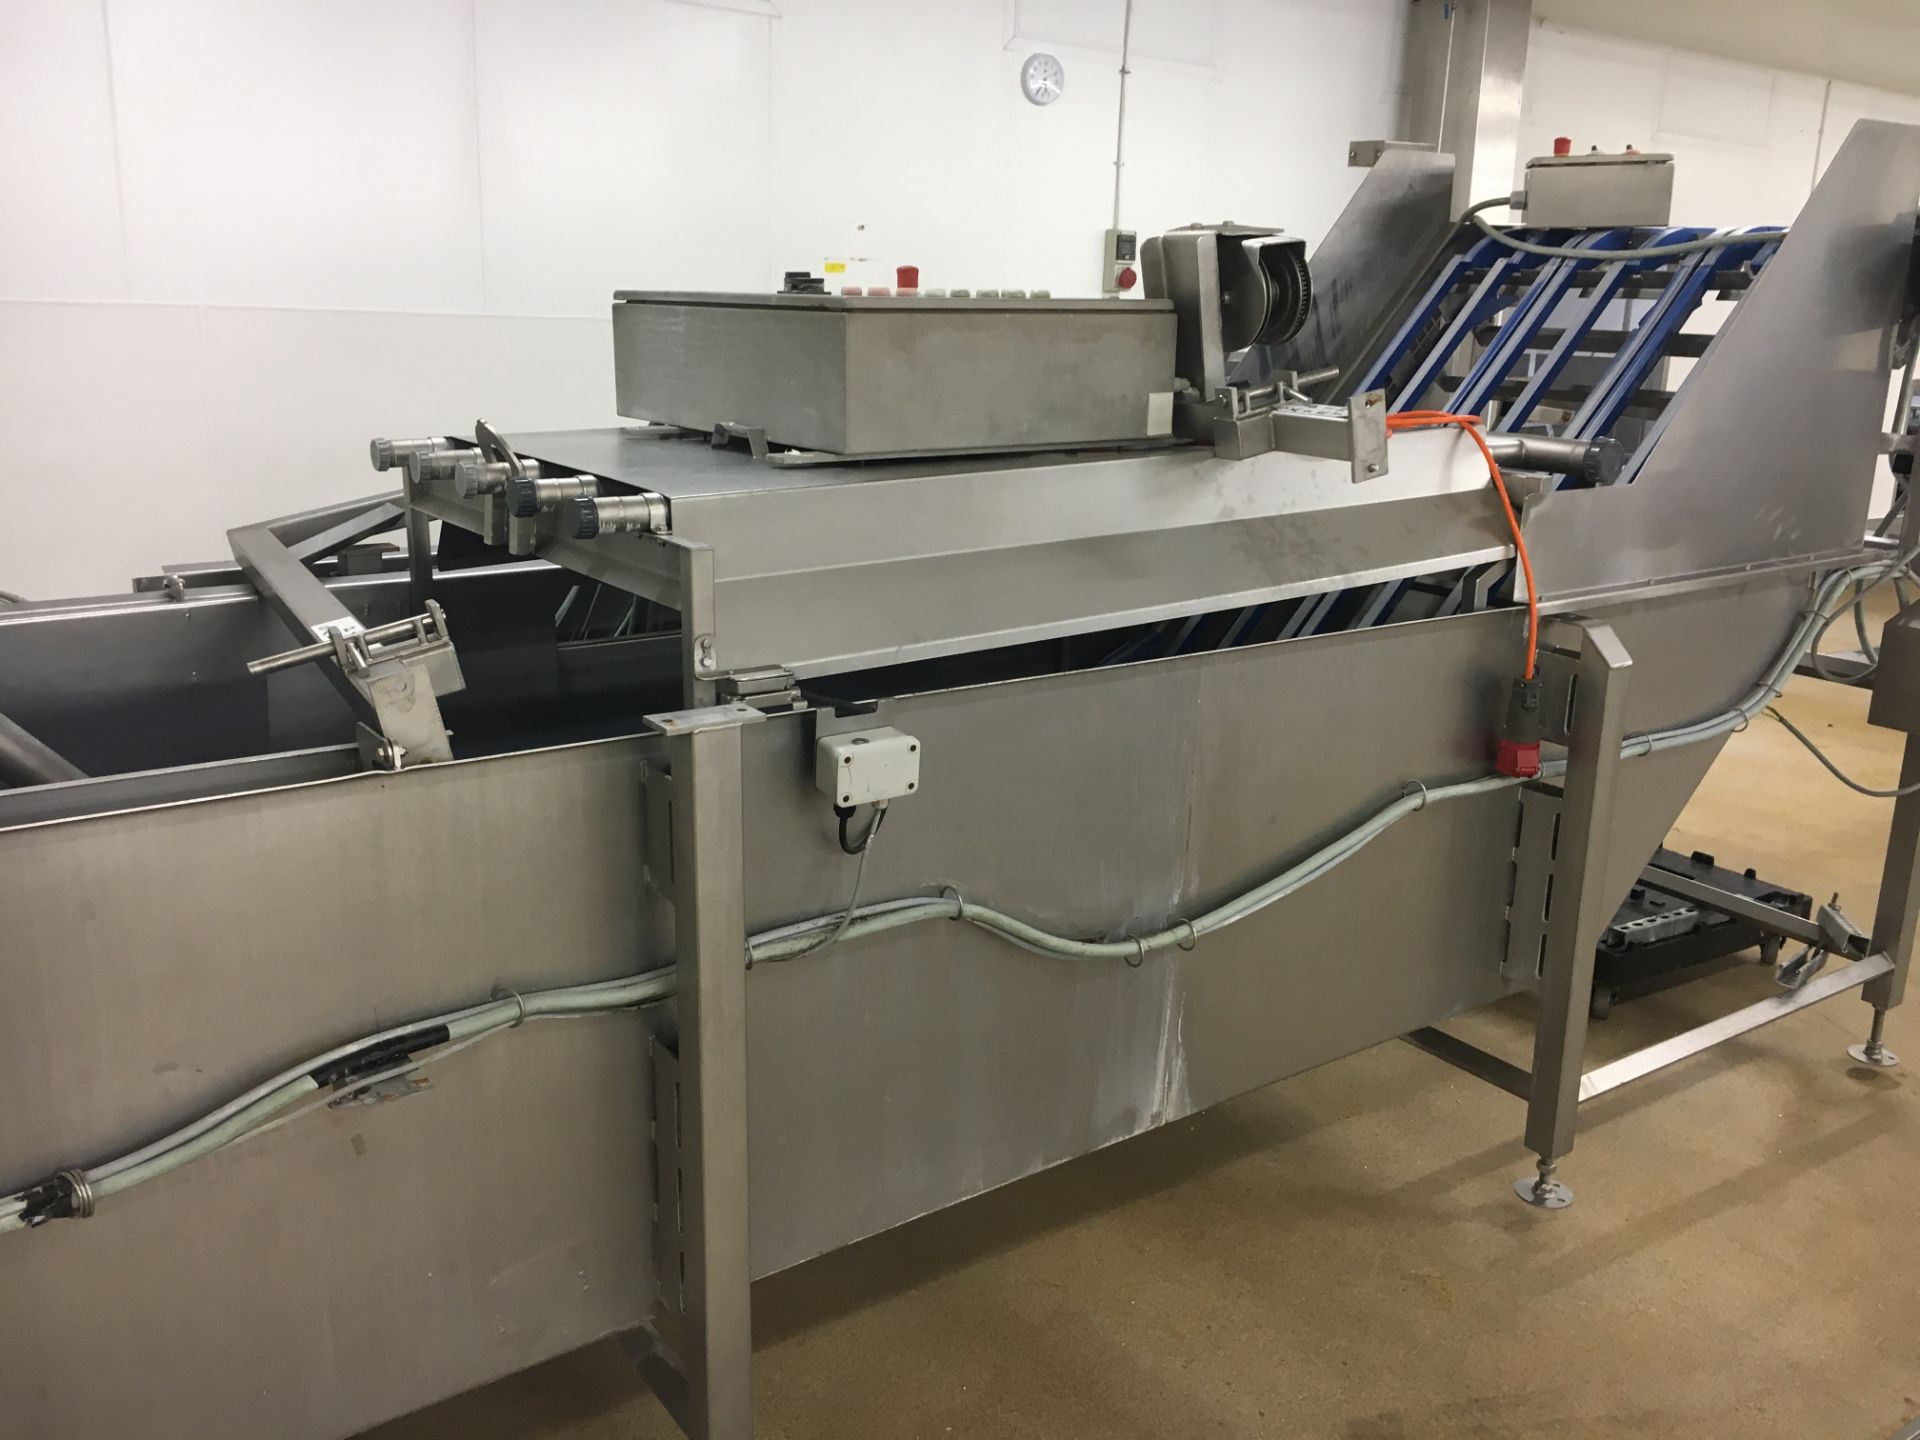 Pineapple or Mango washing flume with spring exit conveyor for soft landing. LO £200